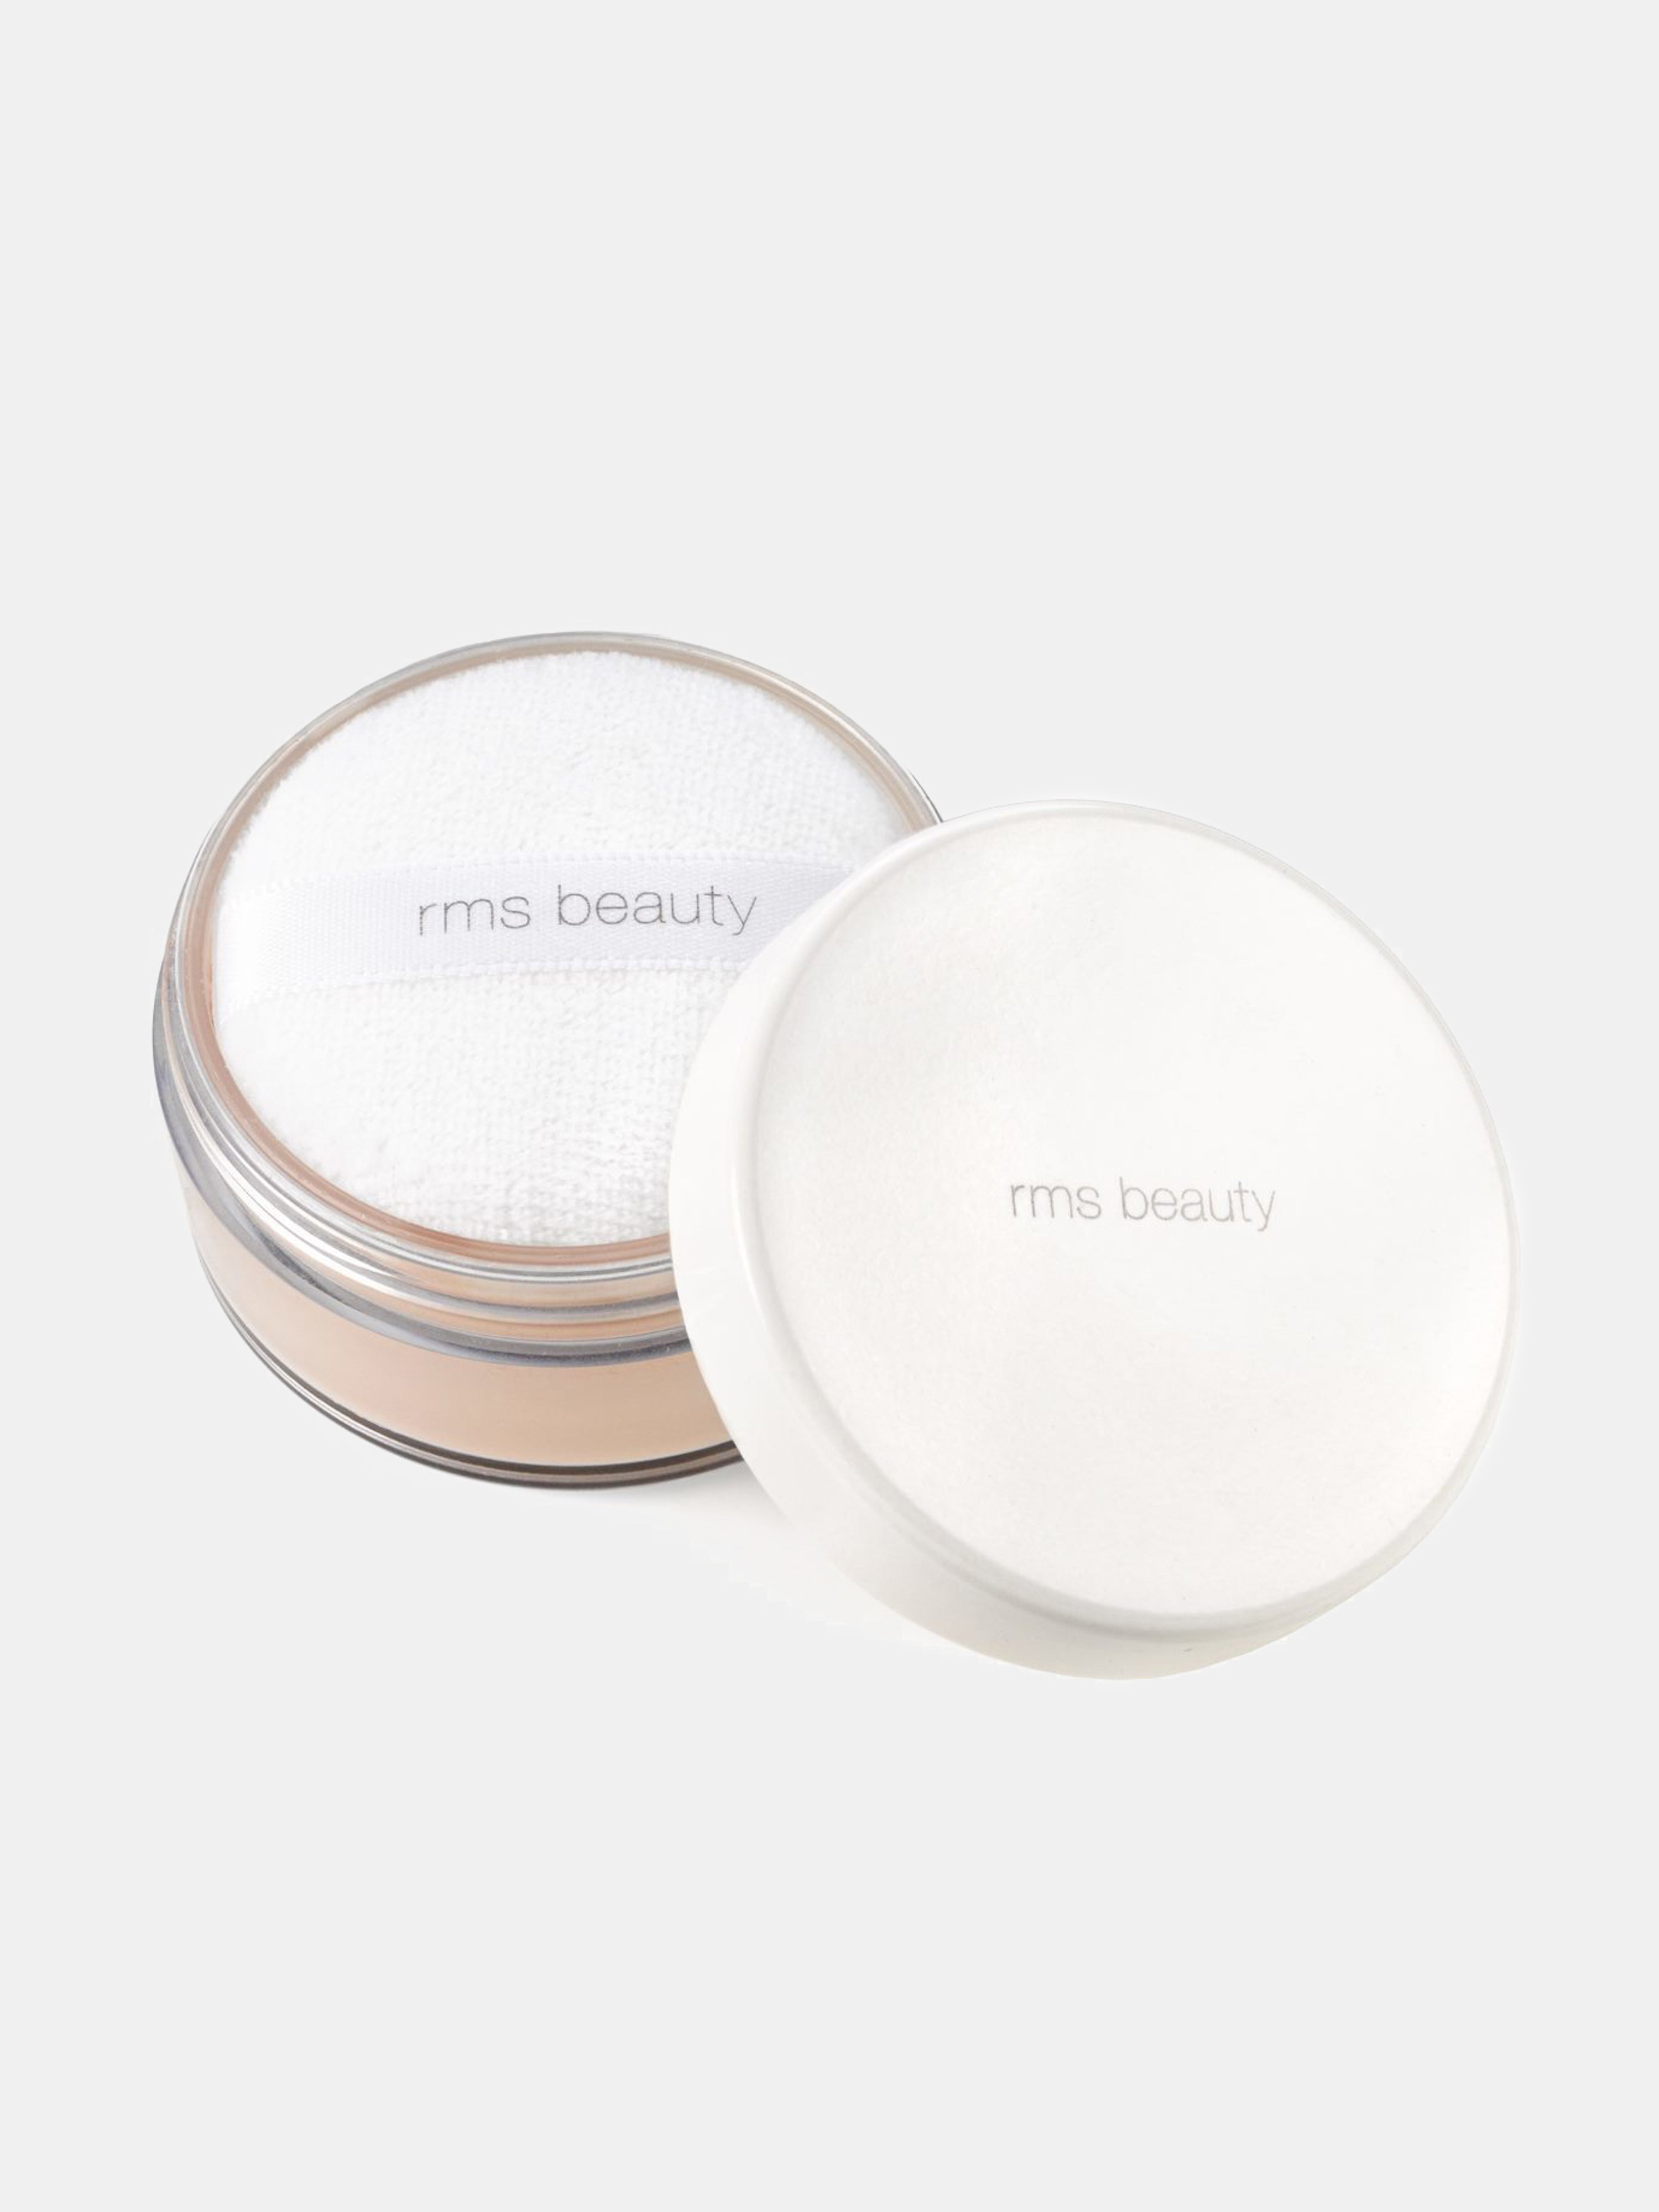 Rms Beauty Tinted "un"powder In 0-1